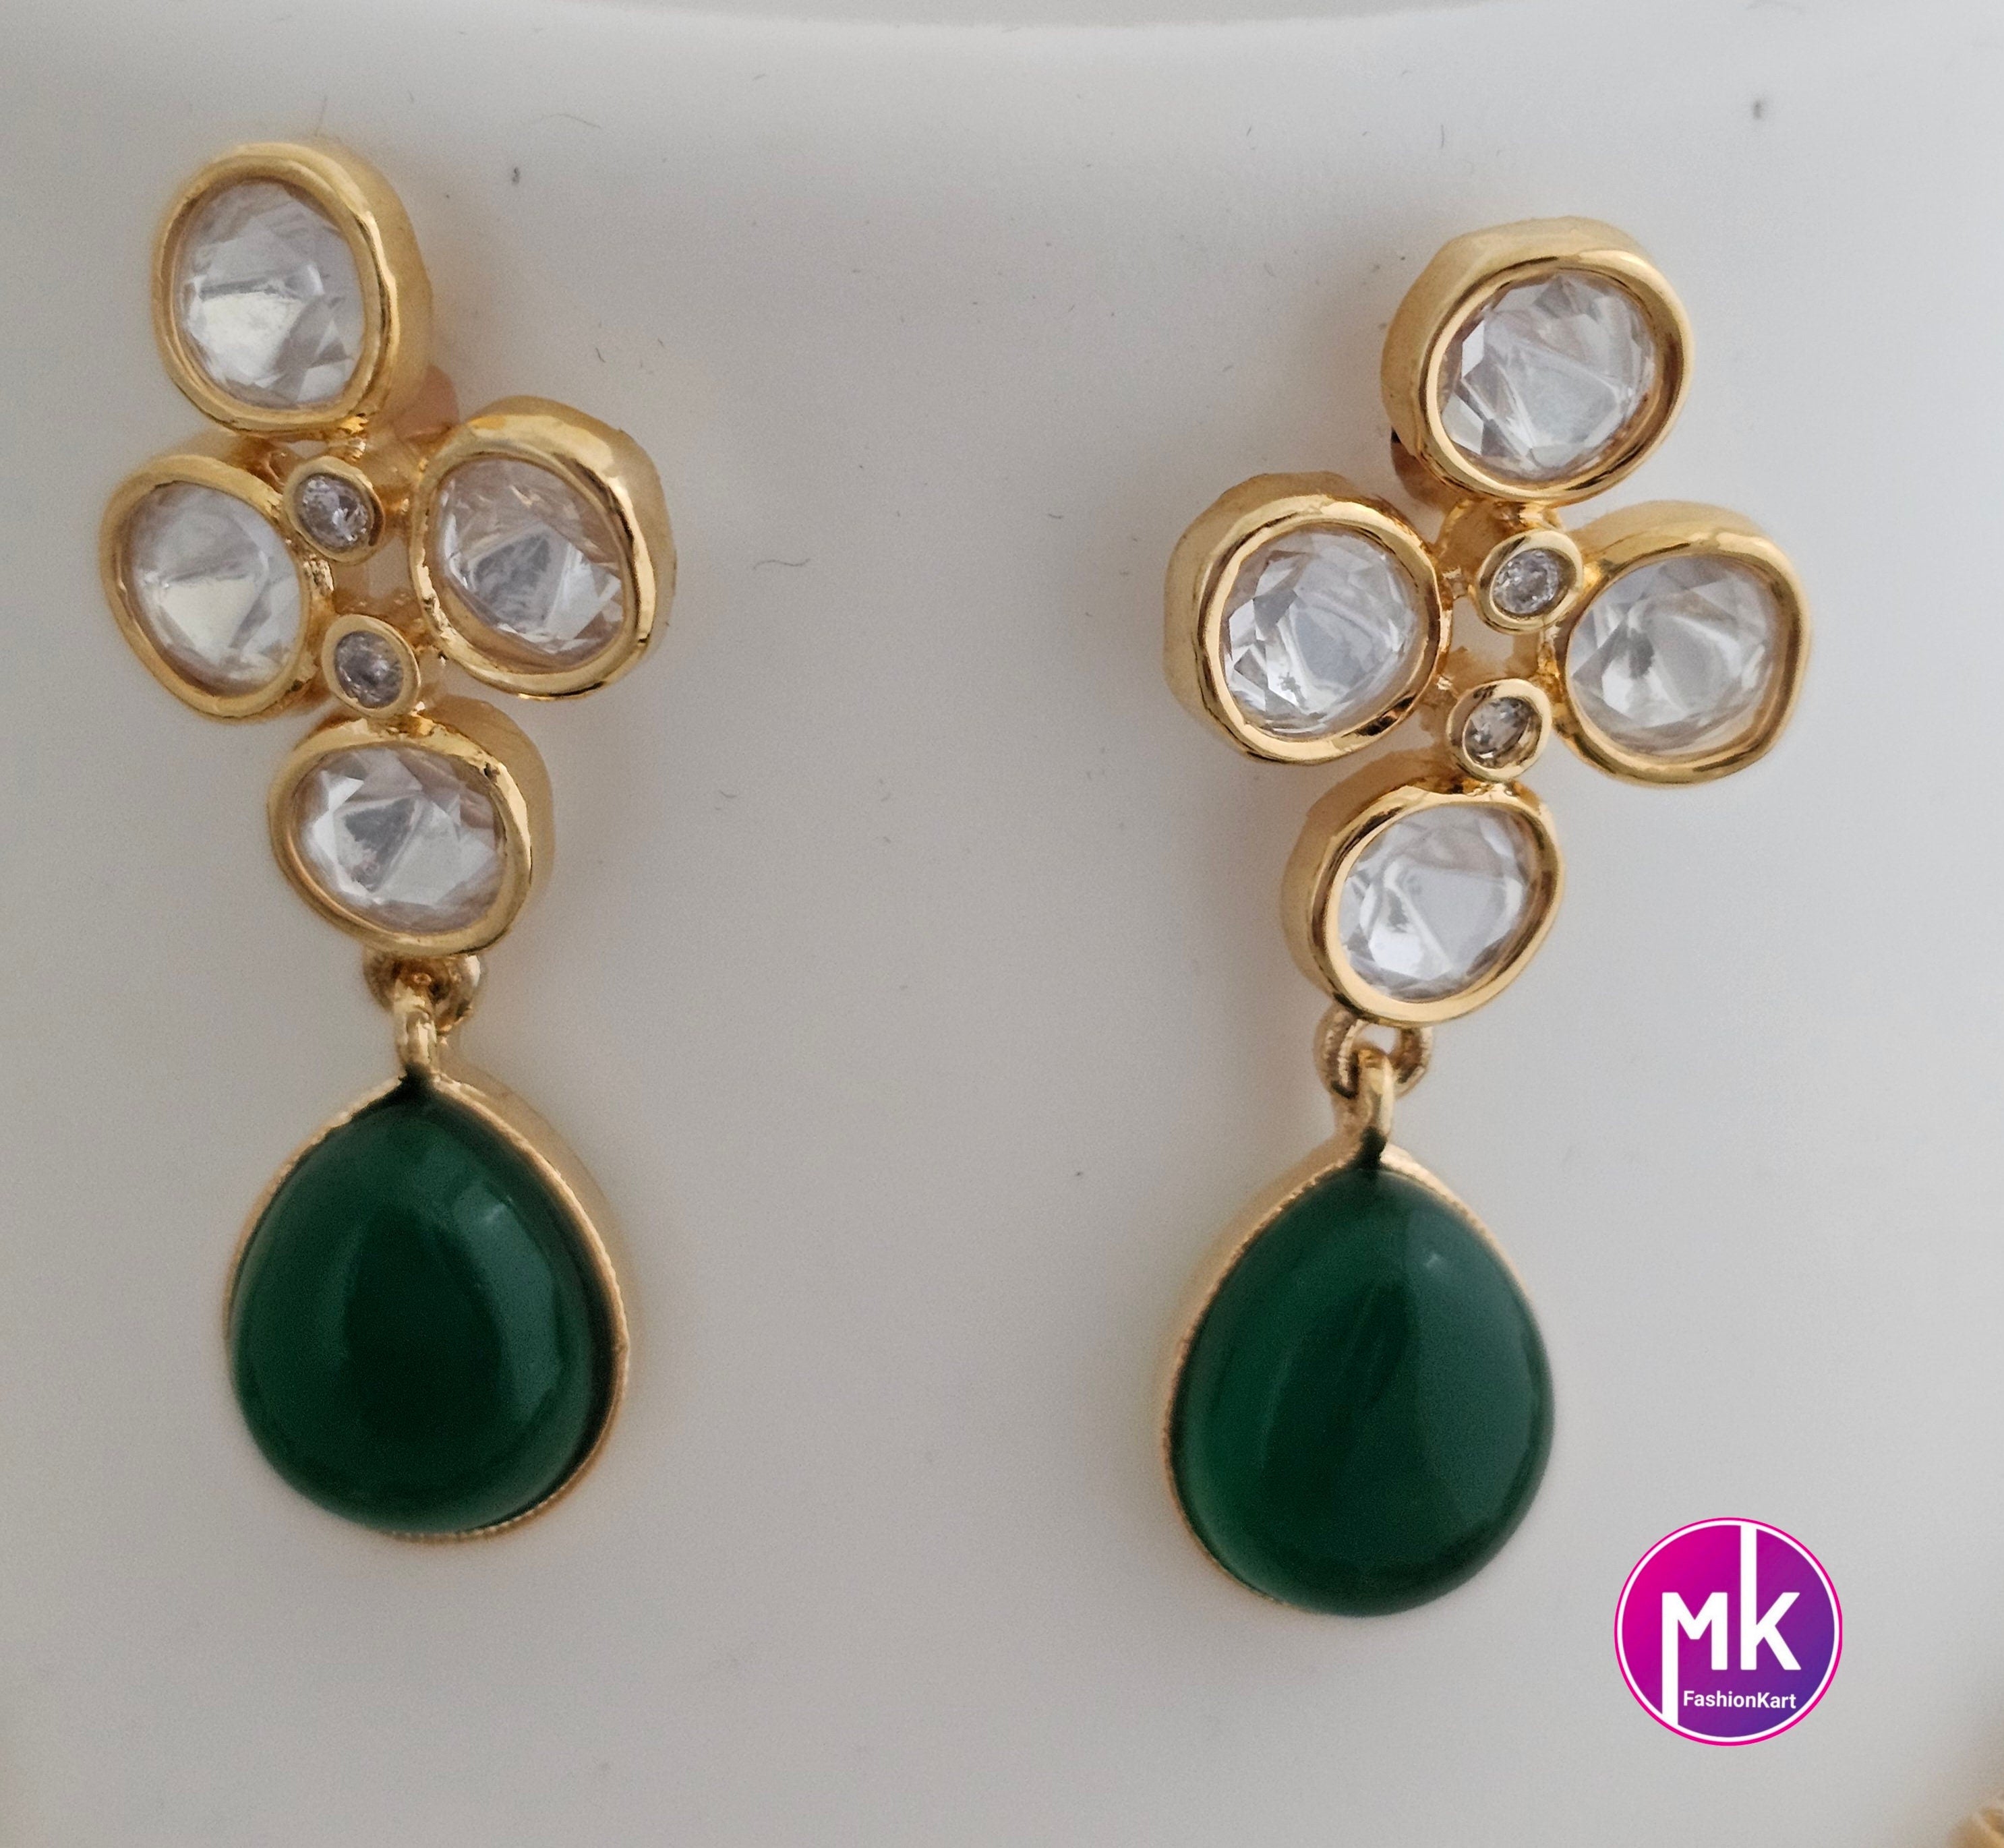 Polki stone Premium Quality Gold polish Necklace with Emerald Hangings and matching polki stone Emerald hanging Earrings